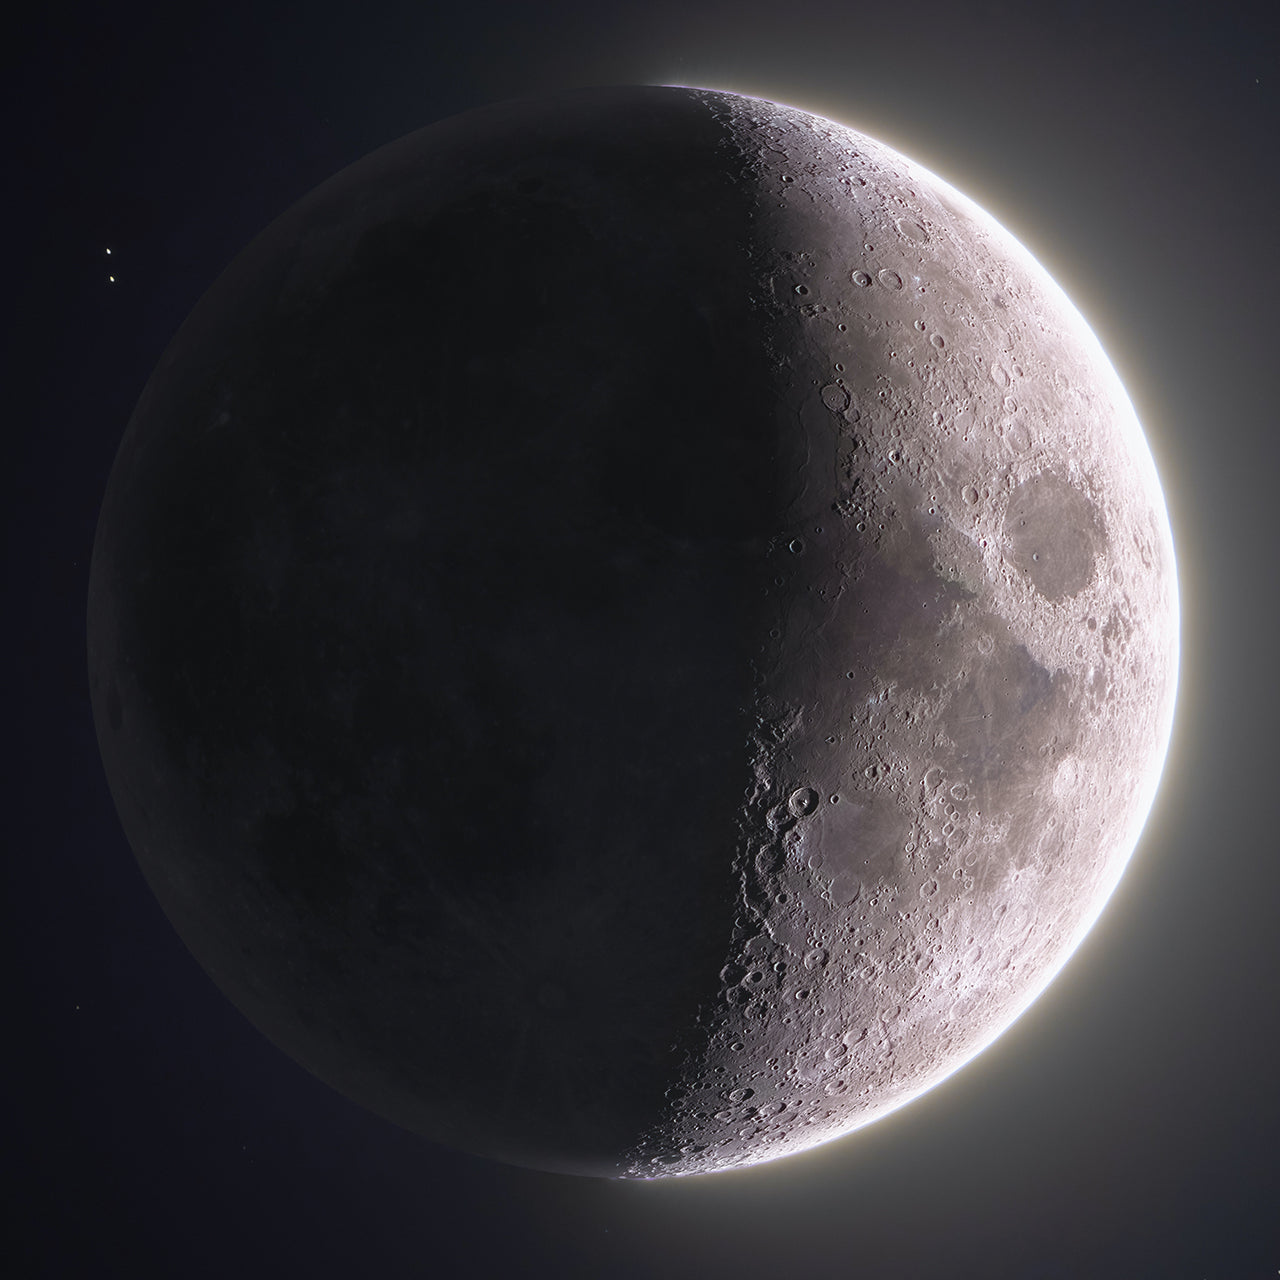 The First Quarter Moon of December 28th 2022